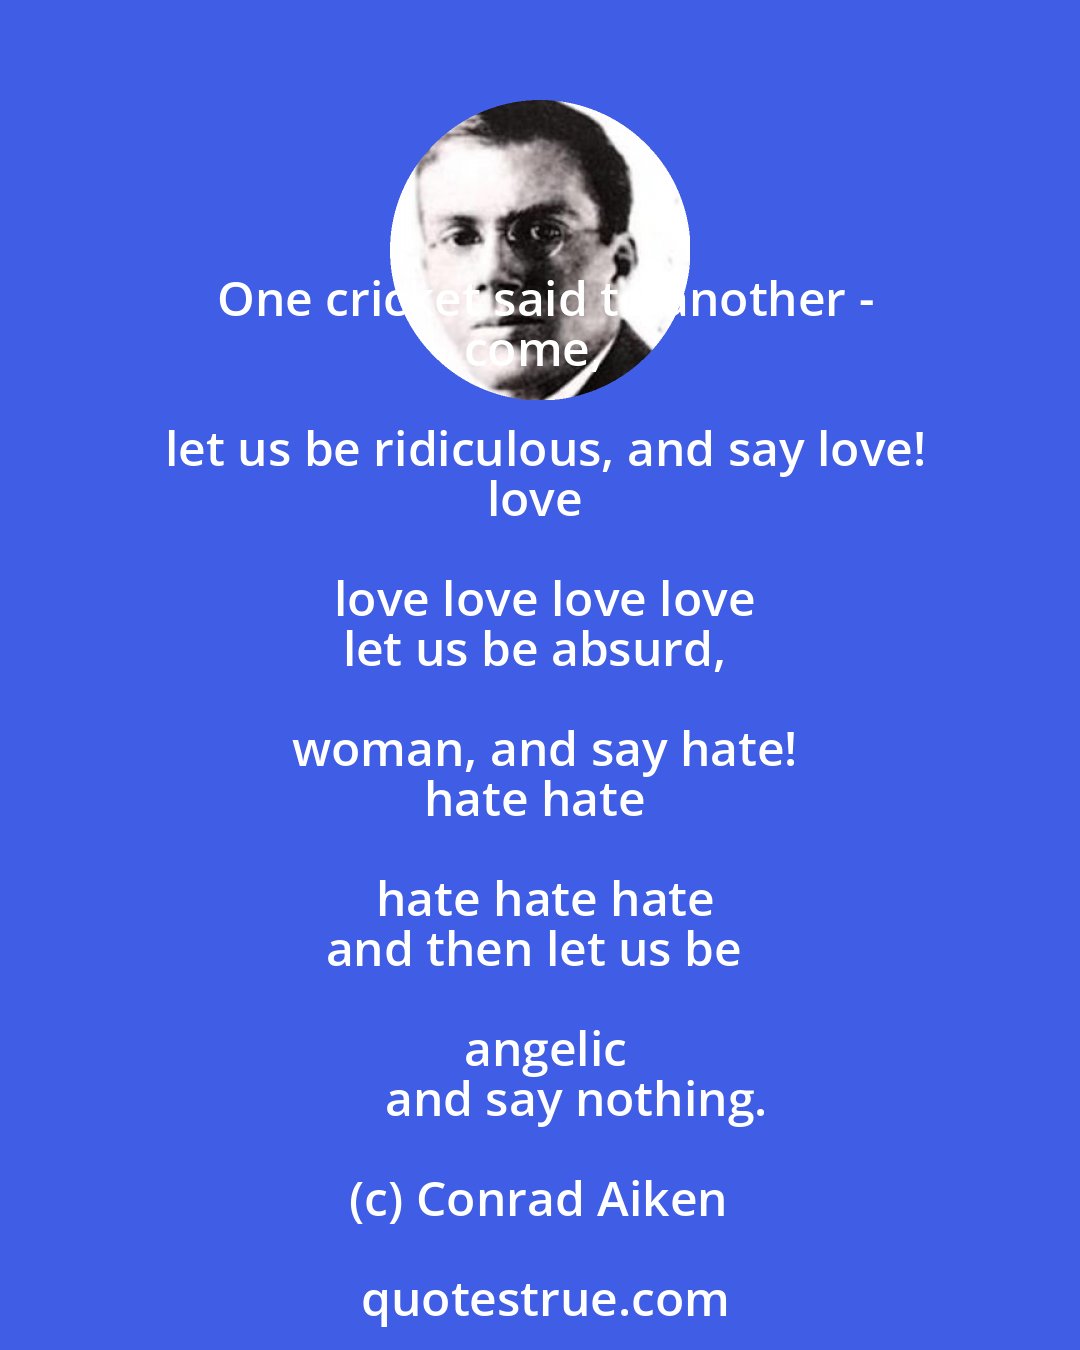 Conrad Aiken: One cricket said to another -
come, let us be ridiculous, and say love!
love love love love love
let us be absurd, woman, and say hate!
hate hate hate hate hate
and then let us be angelic
       and say nothing.